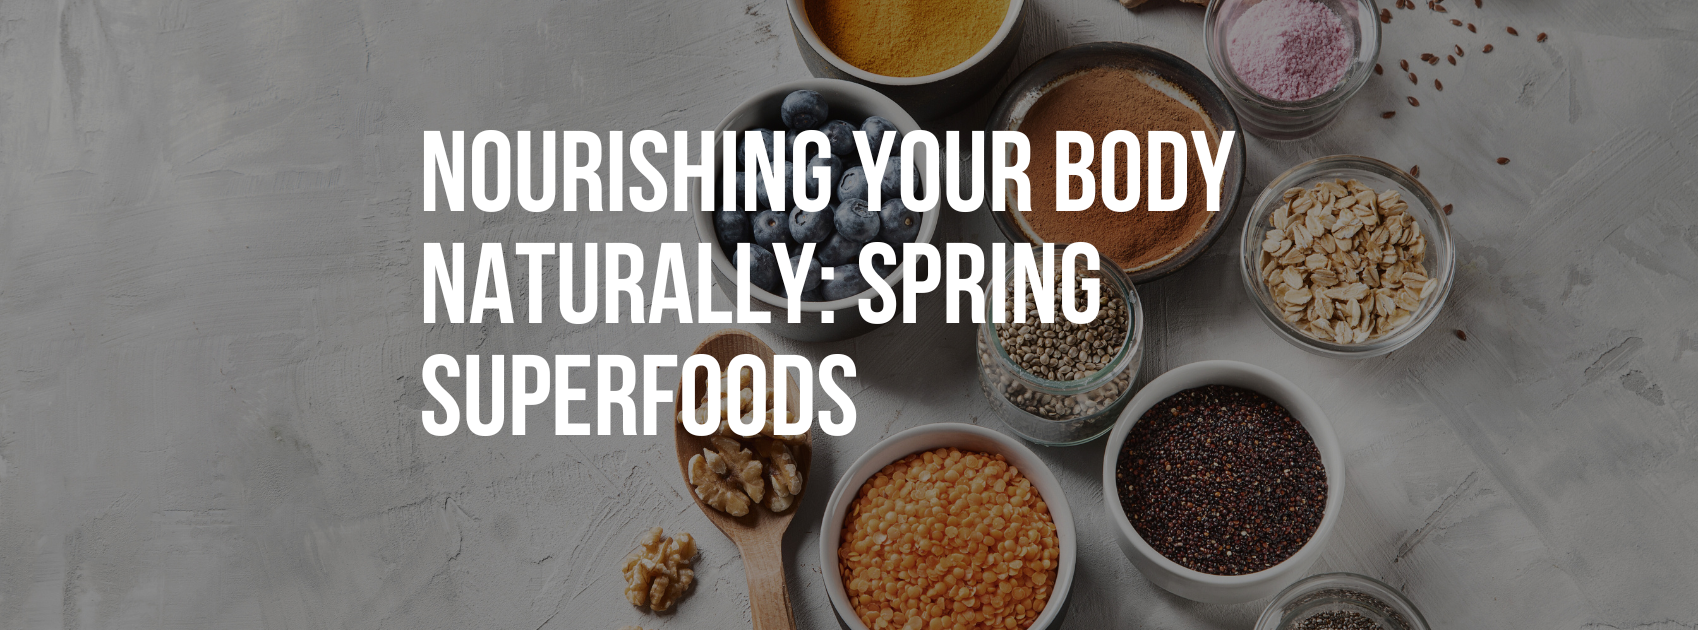 Nourishing Your Body Naturally: Spring Superfoods and Homeopathy for Optimal Wellness